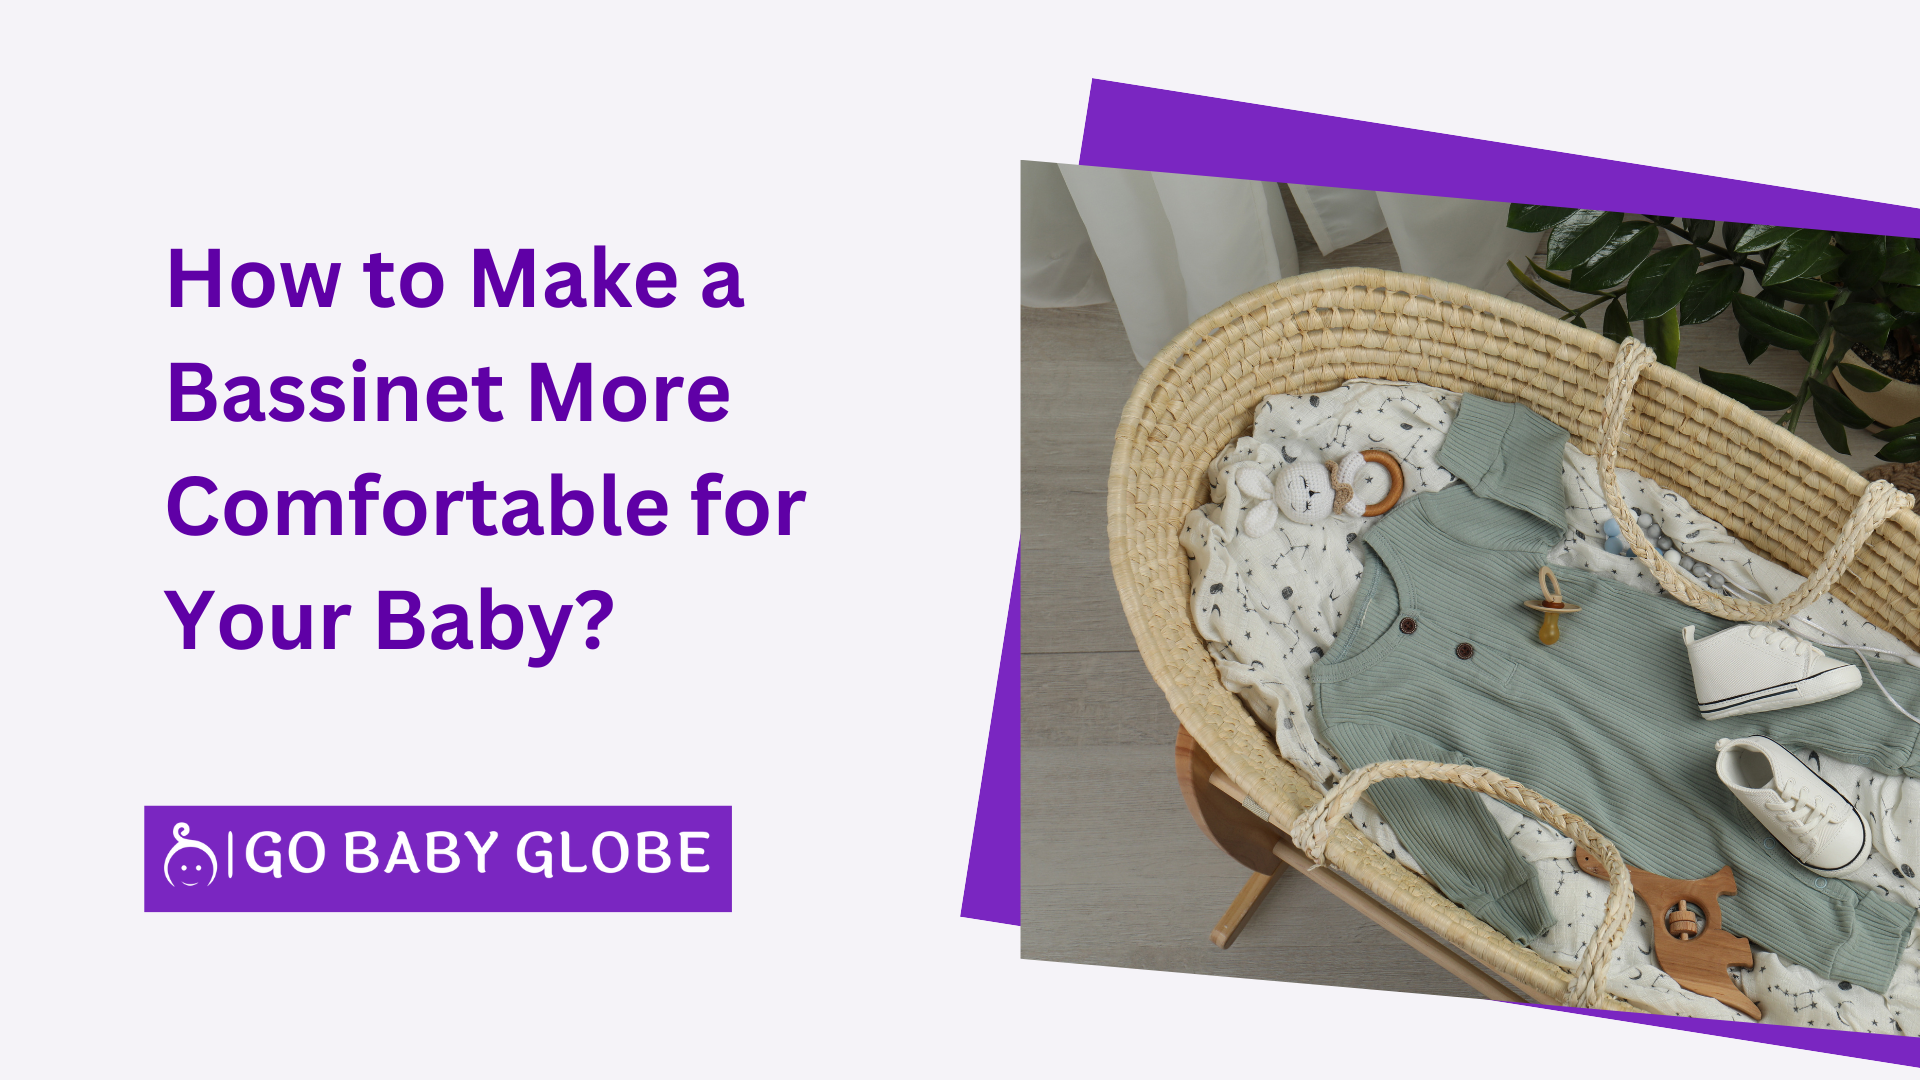 How to Make a Bassinet More Comfortable for Your Baby